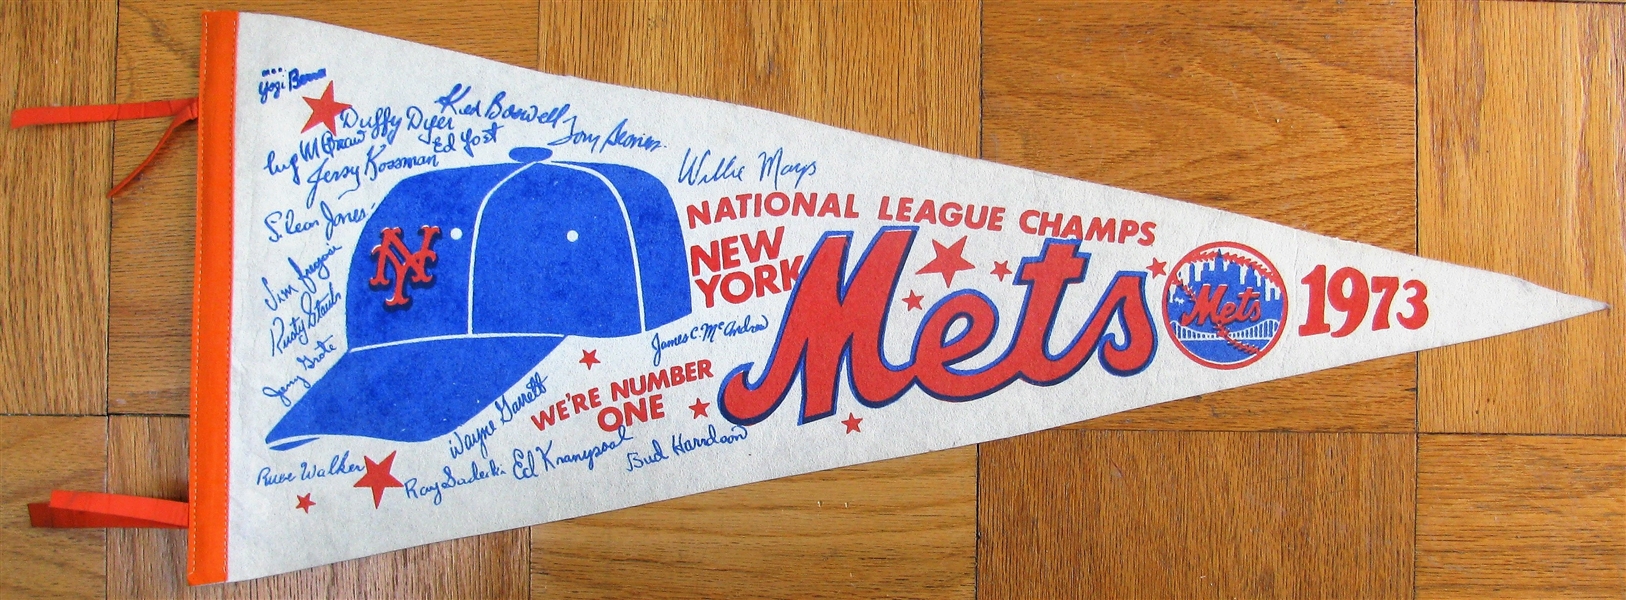 1973 NEW YORK METS NATIONAL LEAGUE CHAMPS PLAYER PENNANT w/ MAYS